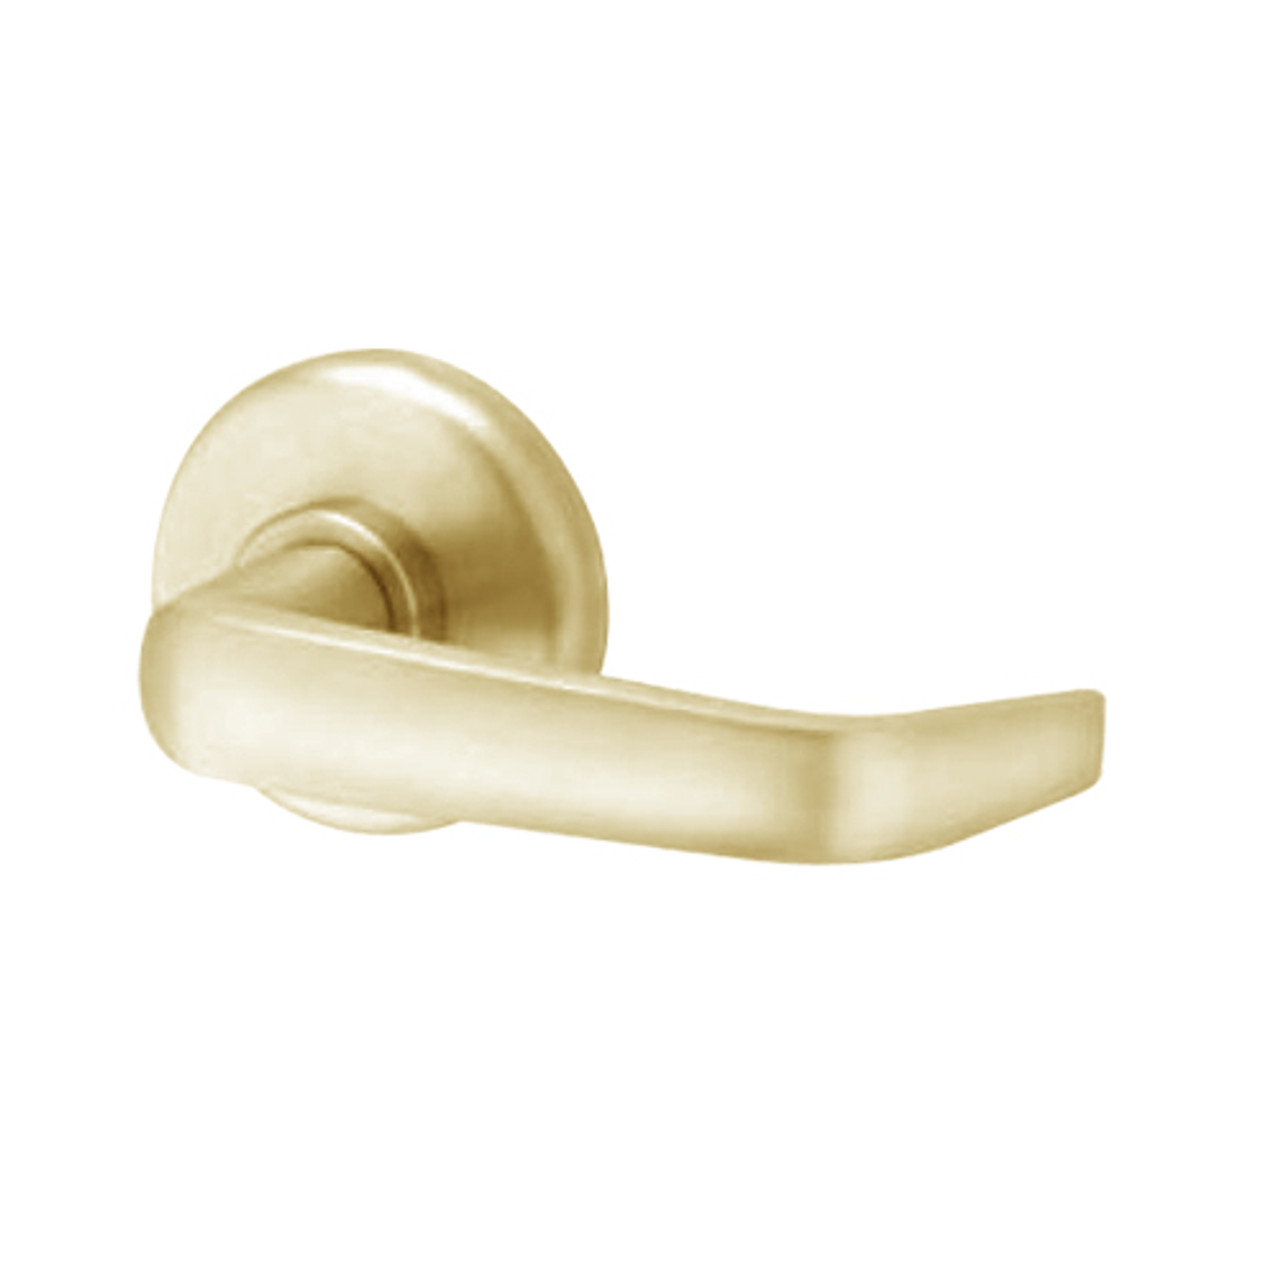 40HTKOS115H606 Best 40H Series Trim Kits Outside Lever Only with Contour w/ Angle Return Style in Satin Brass